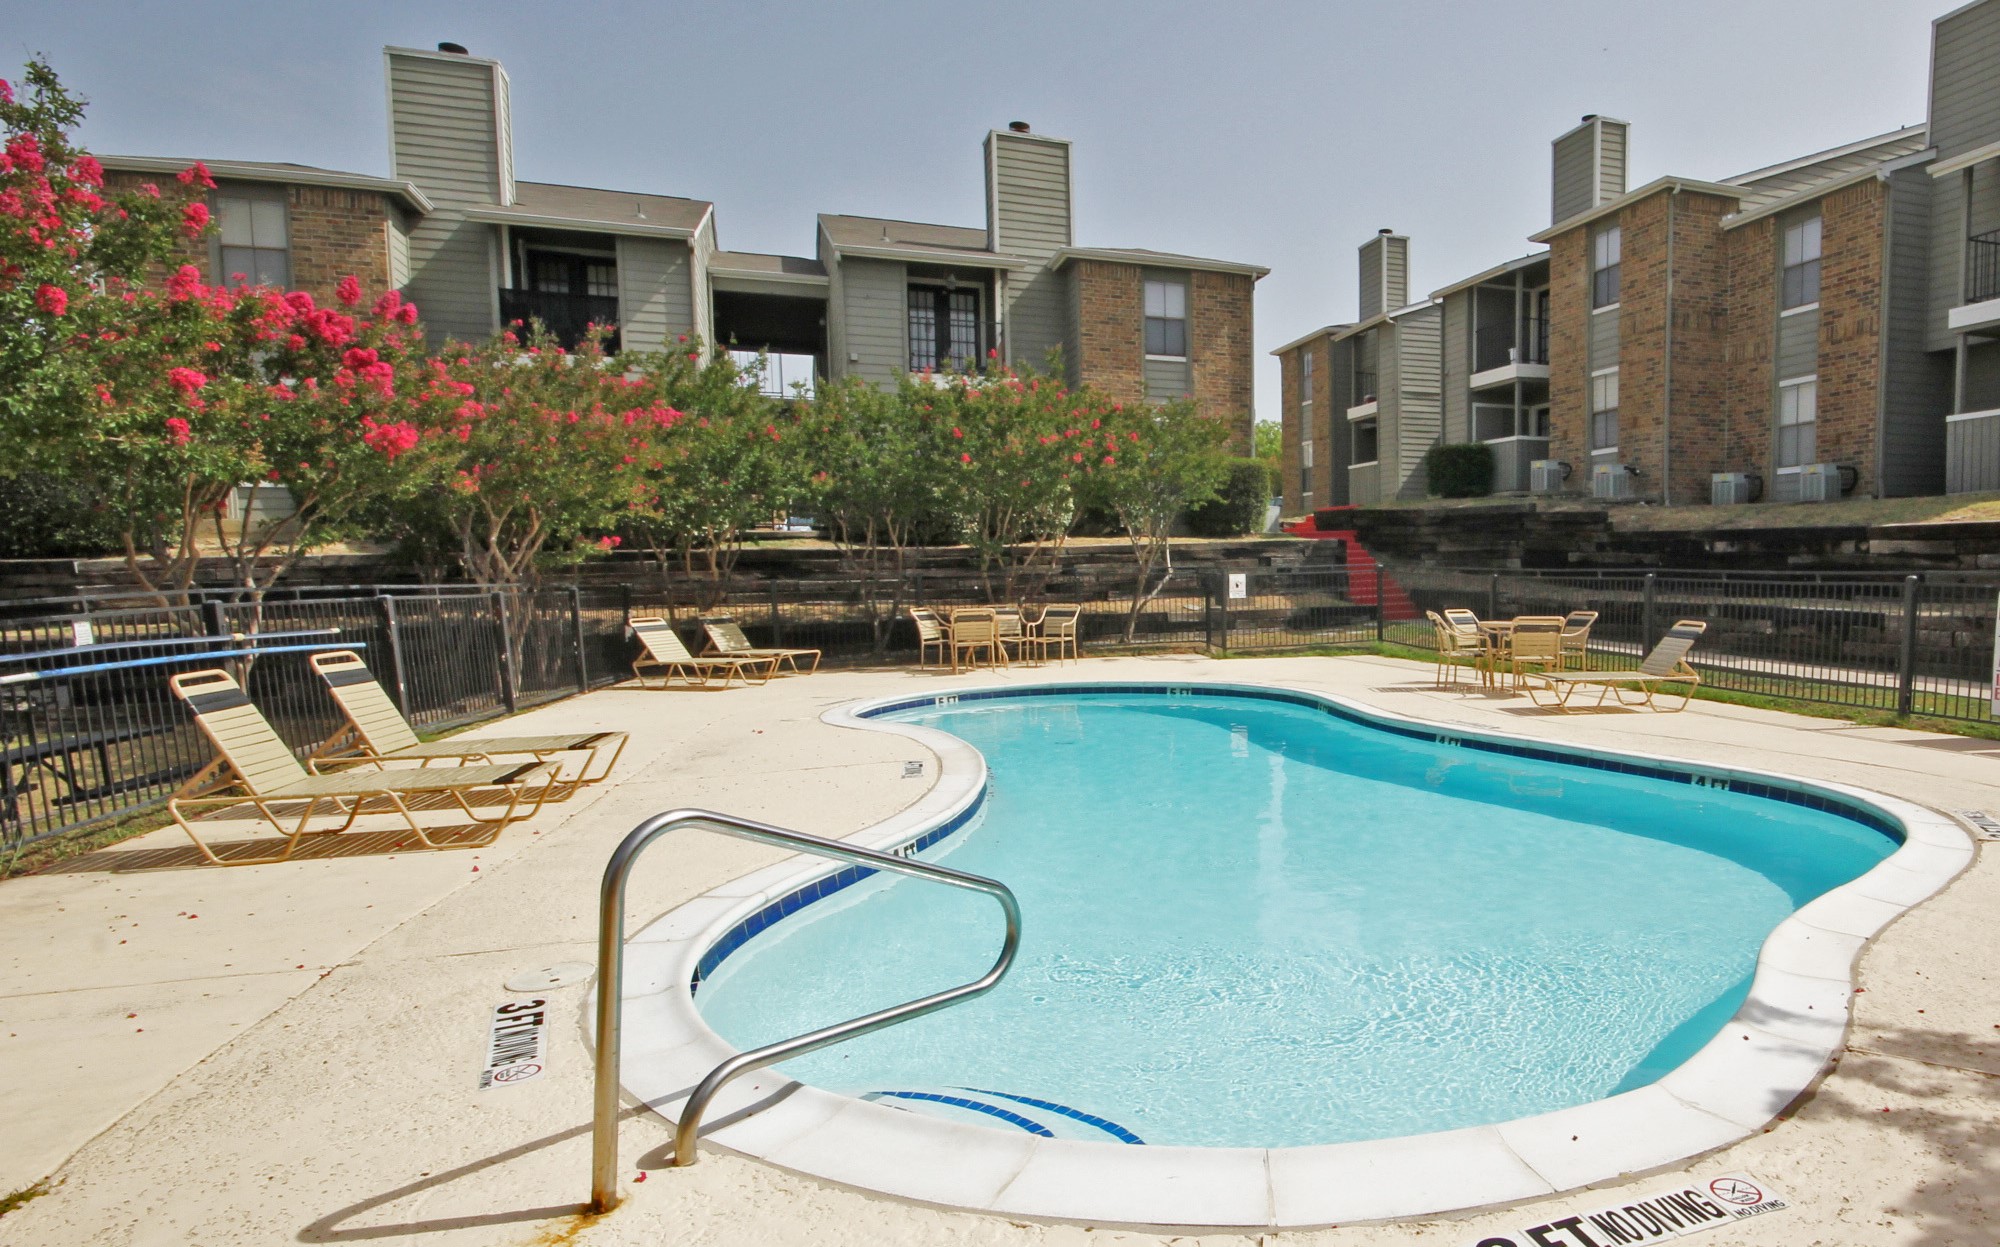 Outdoor Pool Area at Marine Creek Apartments in Fort Worth, Texas